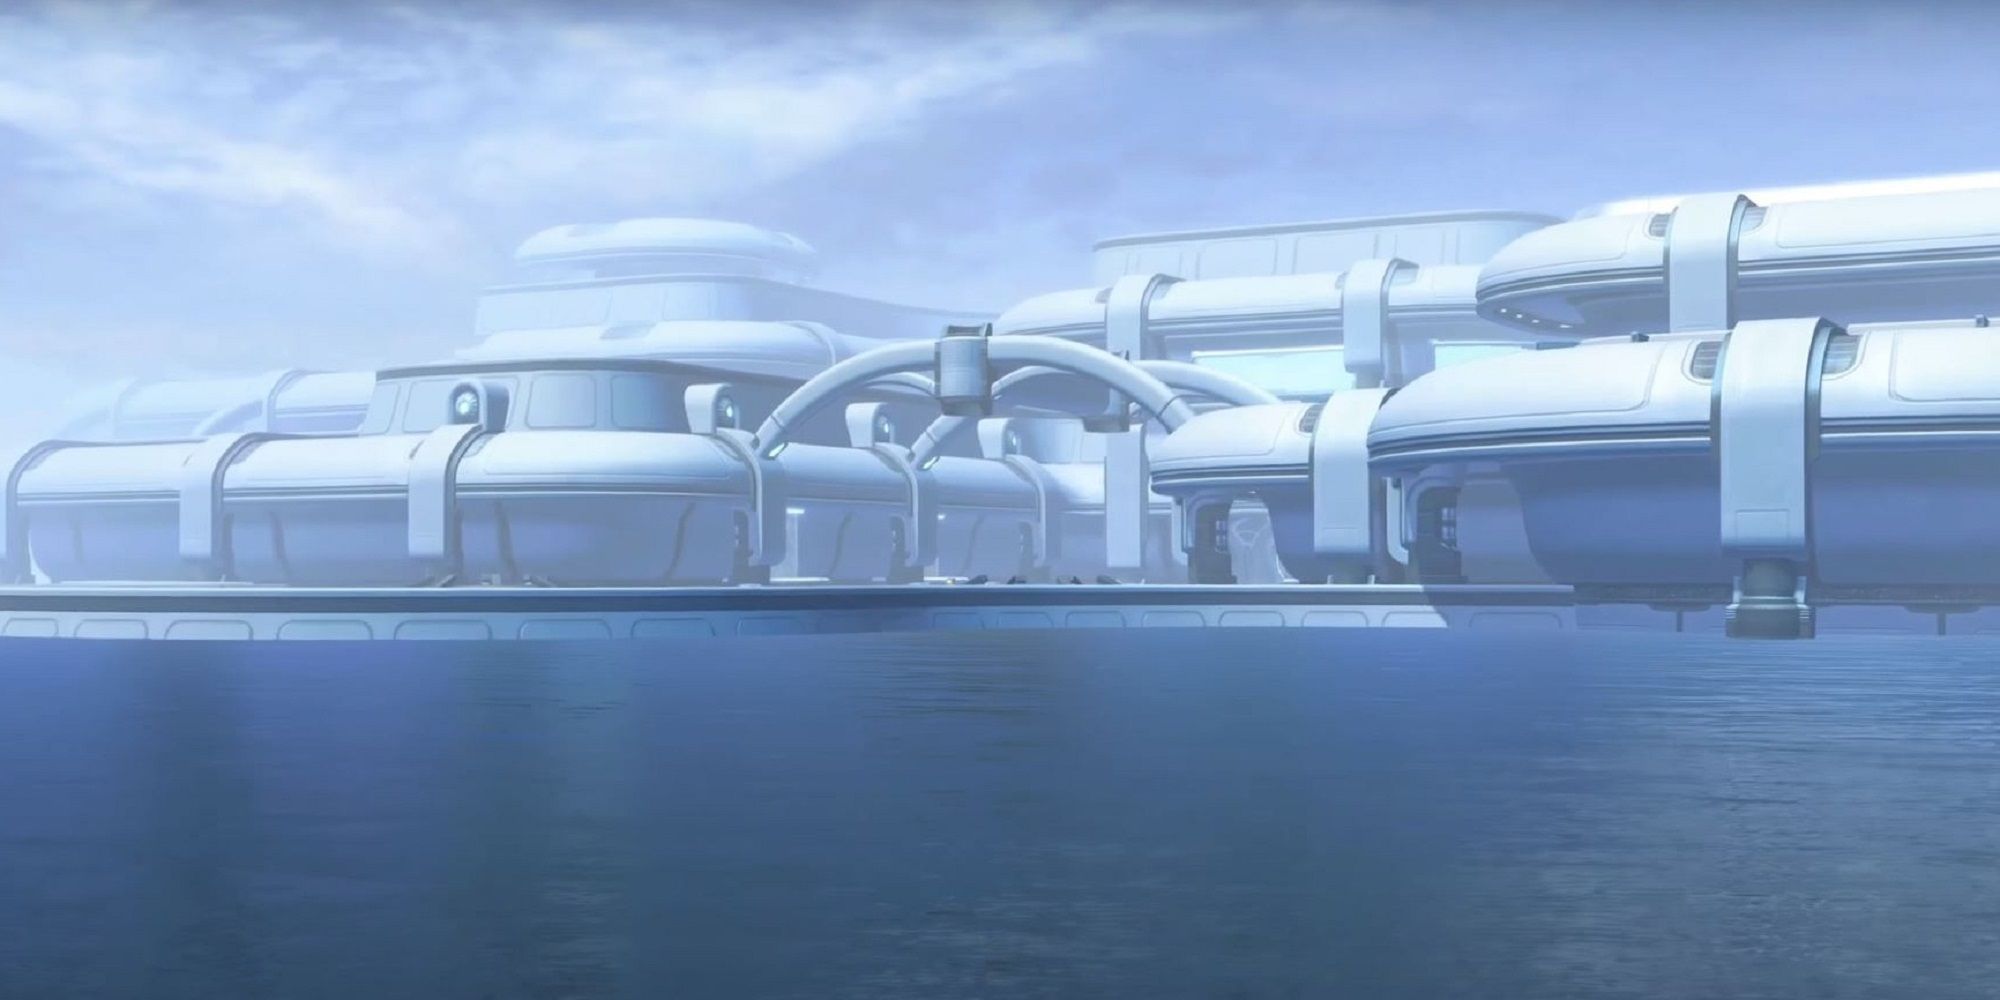 SWTOR's Manaan Retreat, with a large body of water in front